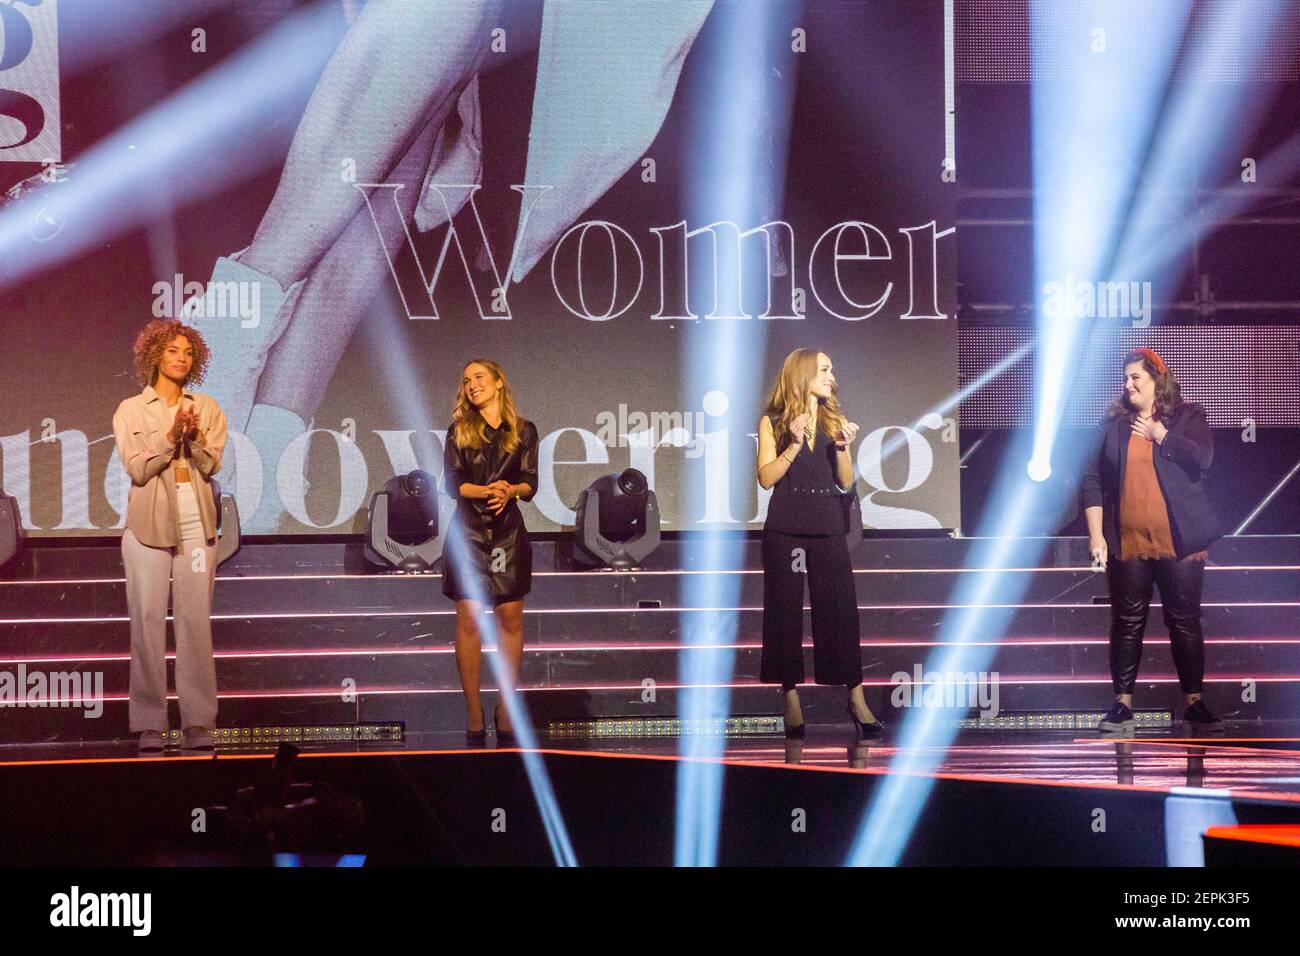 Rust, Germany. 27th Feb, 2021. Jemimah Booysen (l-r), Katharina Wohlrab, Anja Kallenbach and Julia Kremer, the last four finalists in the Miss Germany competition, stand on stage during the event. 16 candidates from all federal states will face the predominantly female jury for the election of Miss Germany 2021. The motto is #EmpoweringAuthenticWomen. According to the organizers, the competition is no longer primarily about beauty, but about the ability to motivate others and send an individual message. Credit: Philipp von Ditfurth/dpa/Alamy Live News Stock Photo